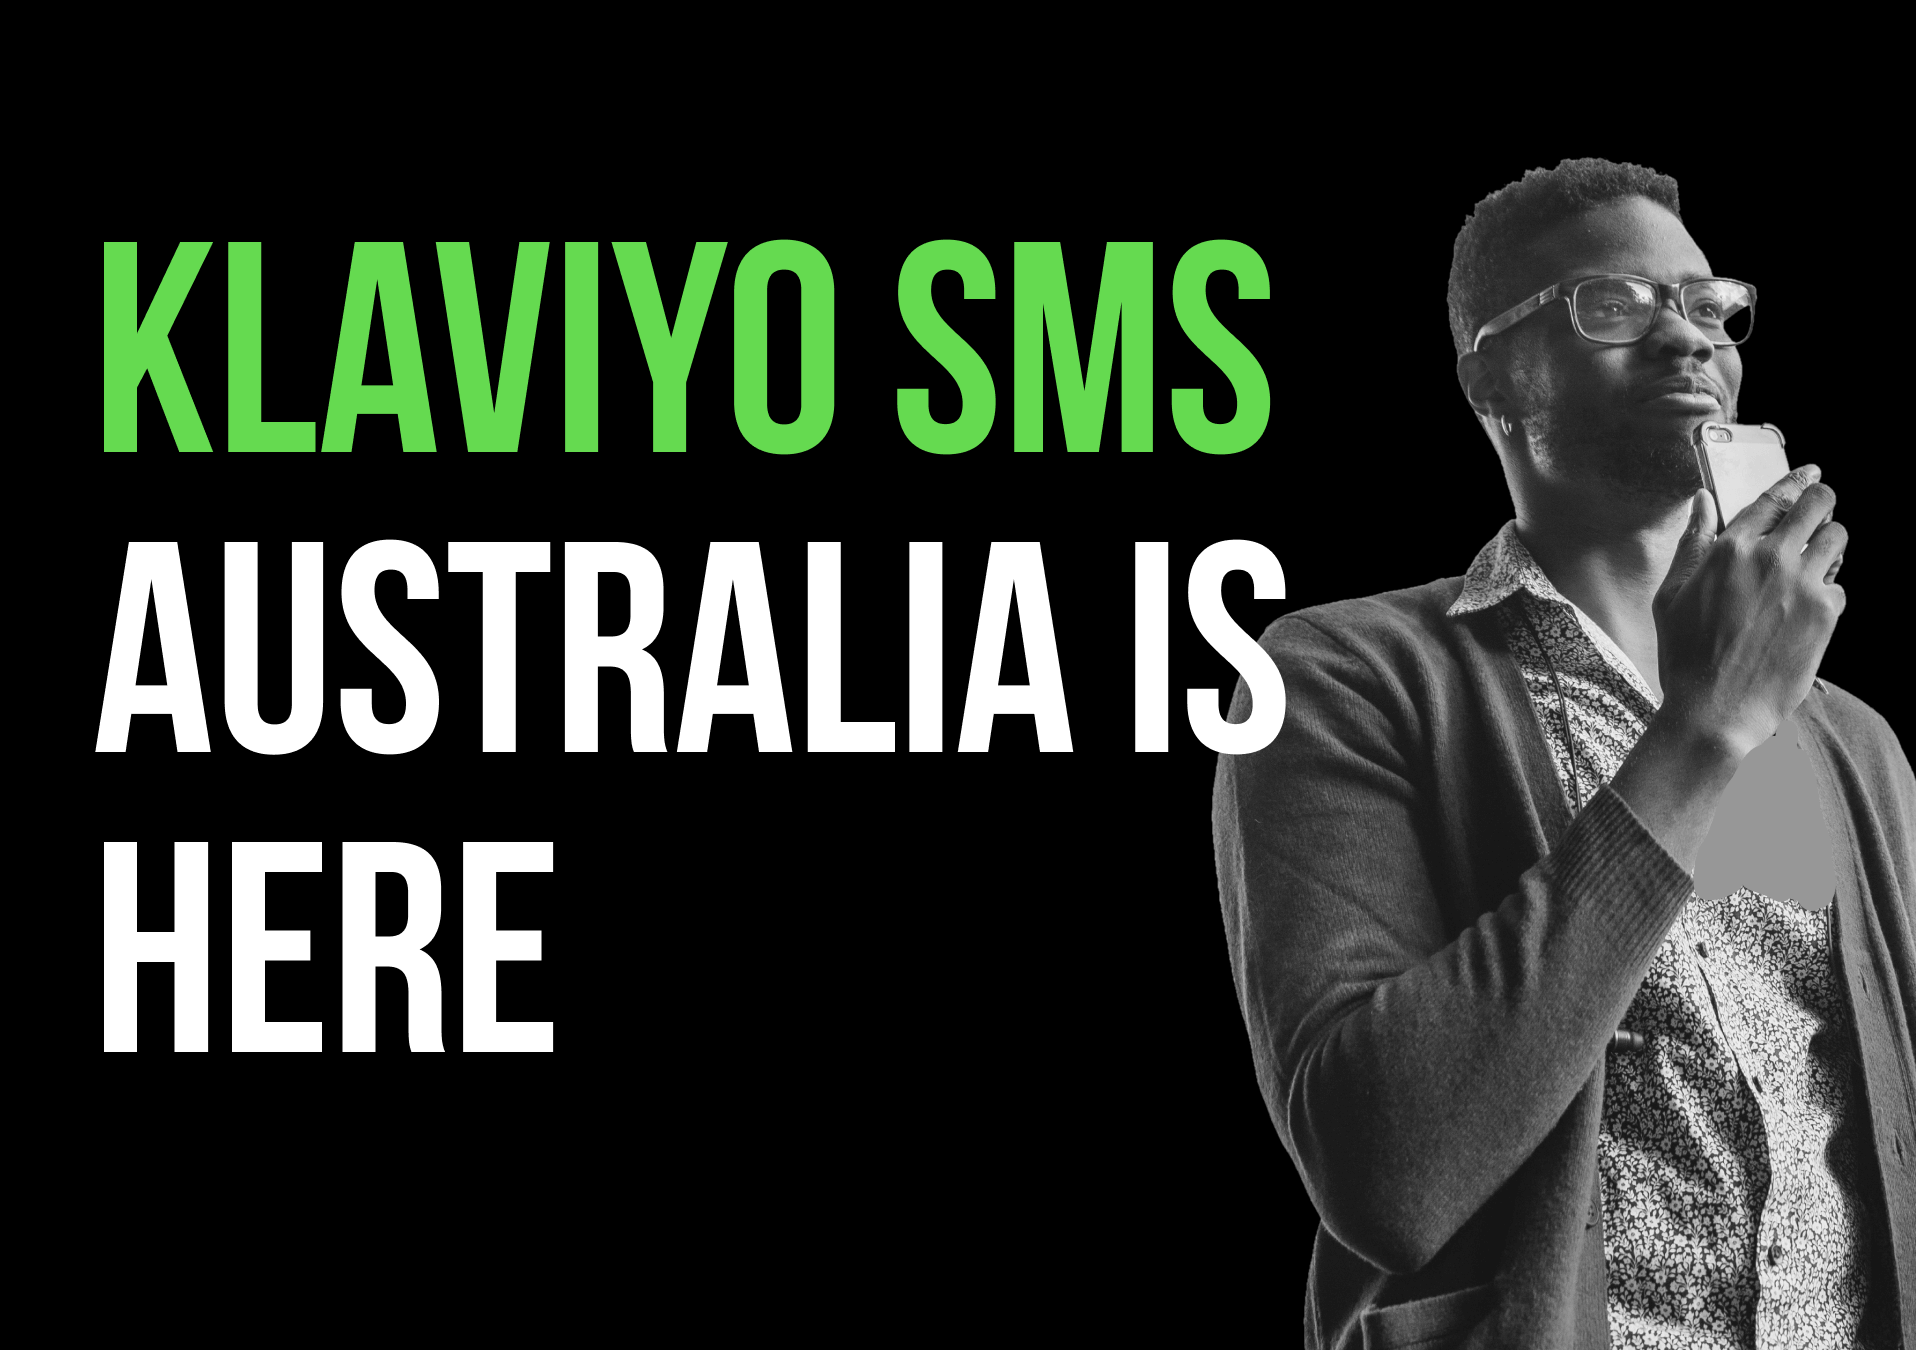 Klaviyo SMS Australia is HERE (5 Essential Tips For Text Marketing Down Under)